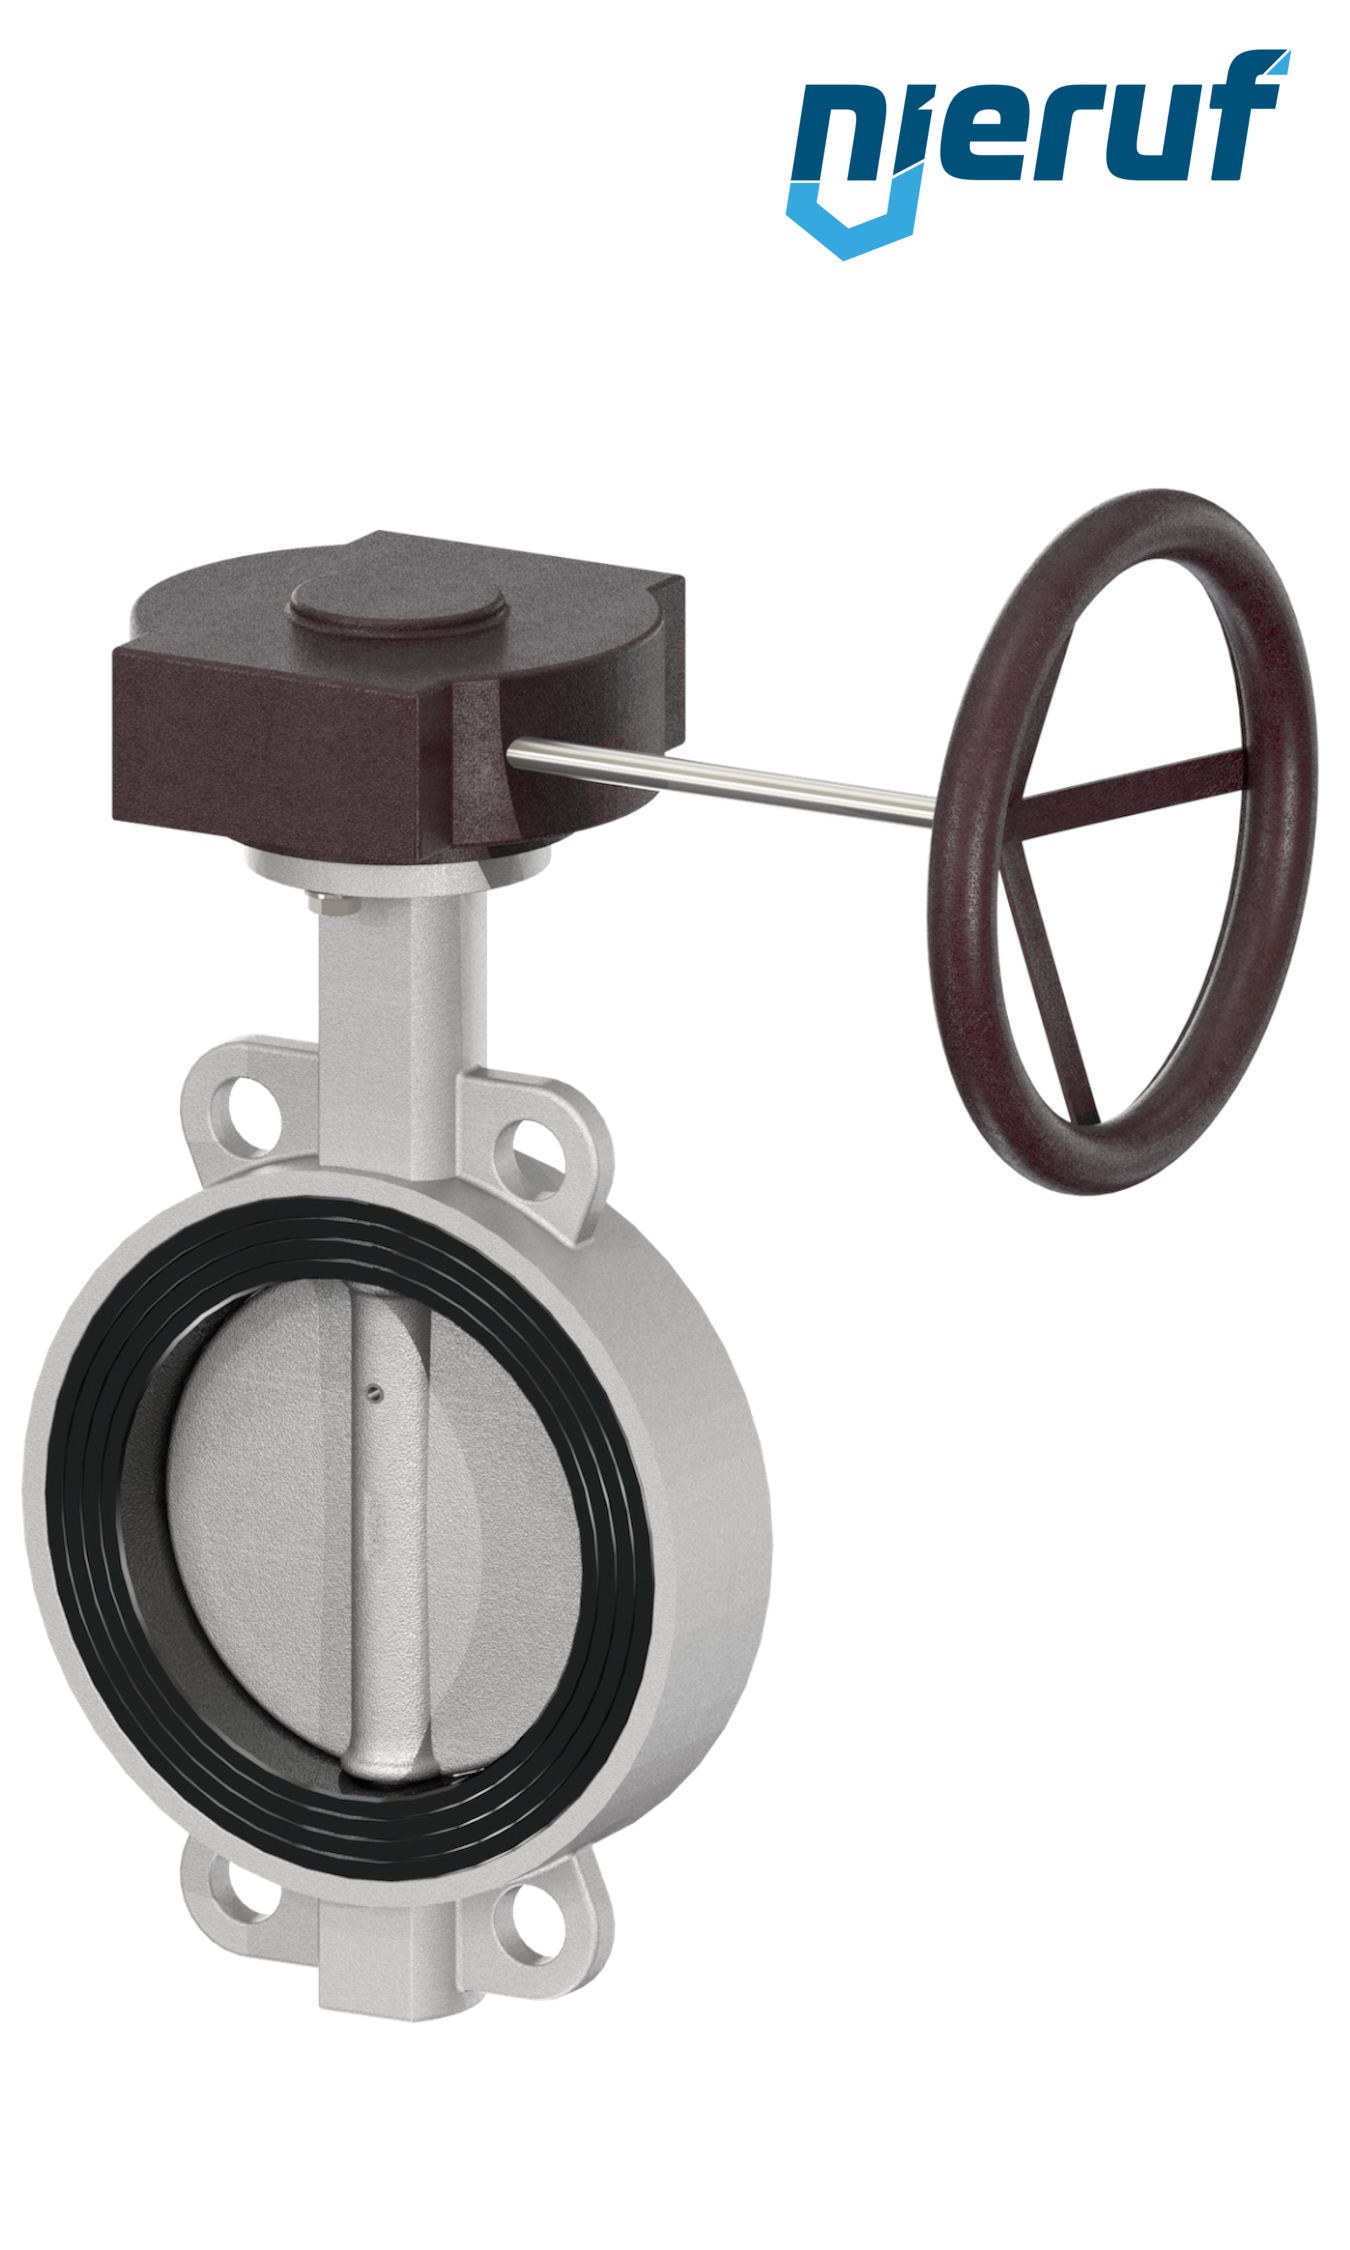 Butterfly-valve-stainless-steel DN 80 PN16 AK08 EPDM gearbox